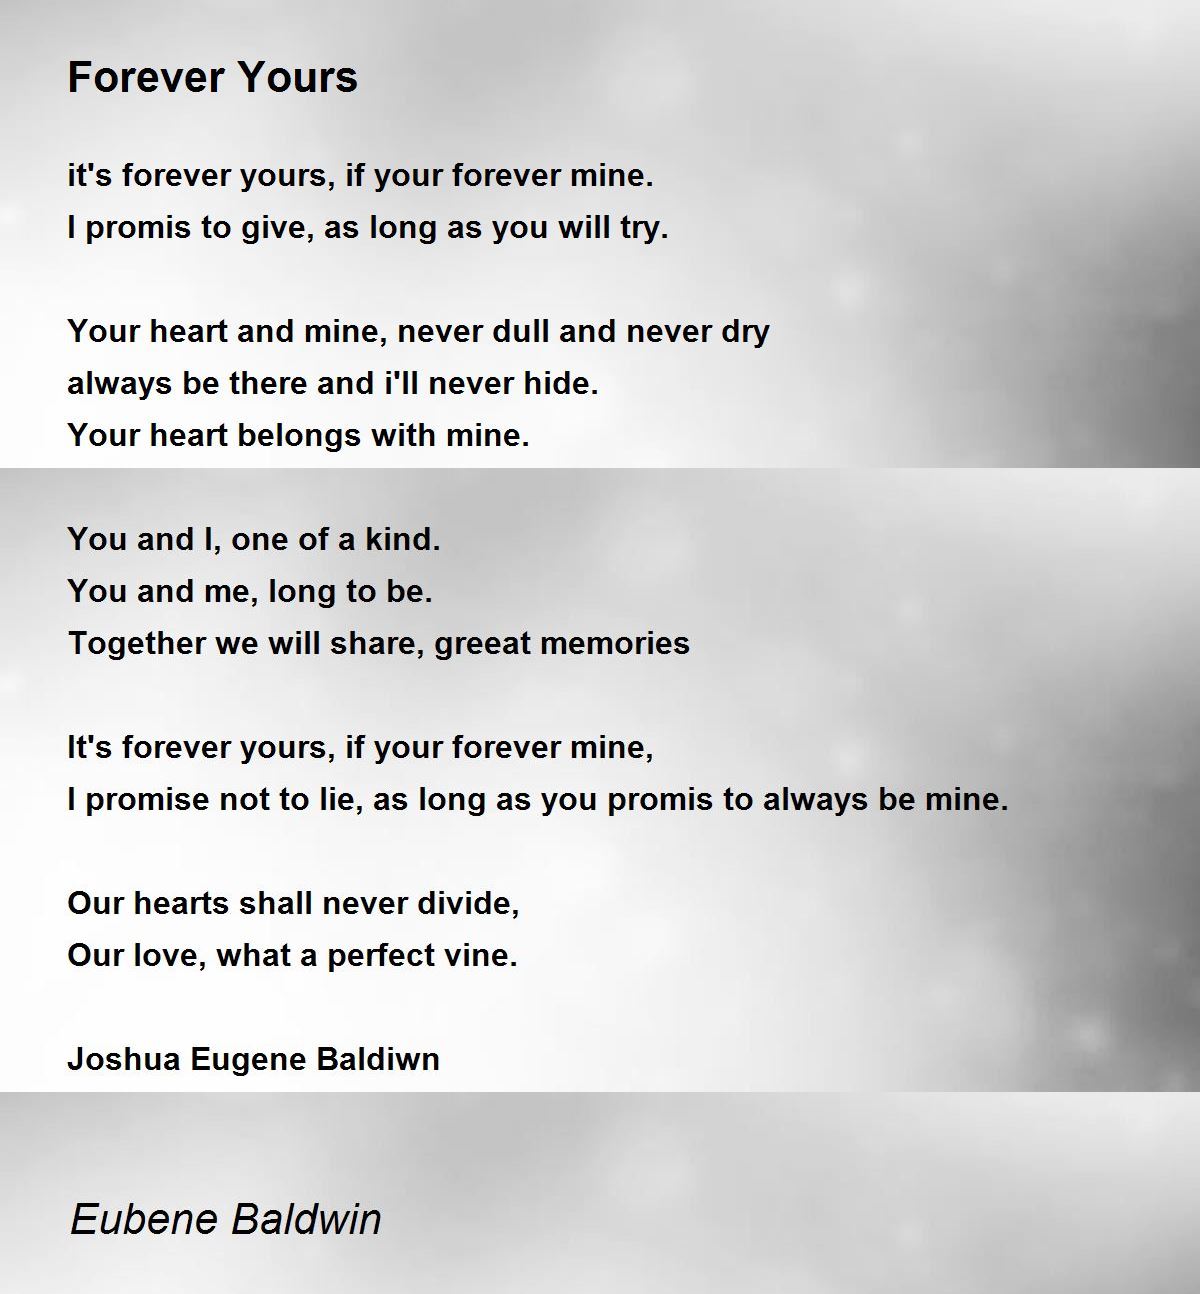 Forever Yours - Forever Yours Poem by Eubene Baldwin